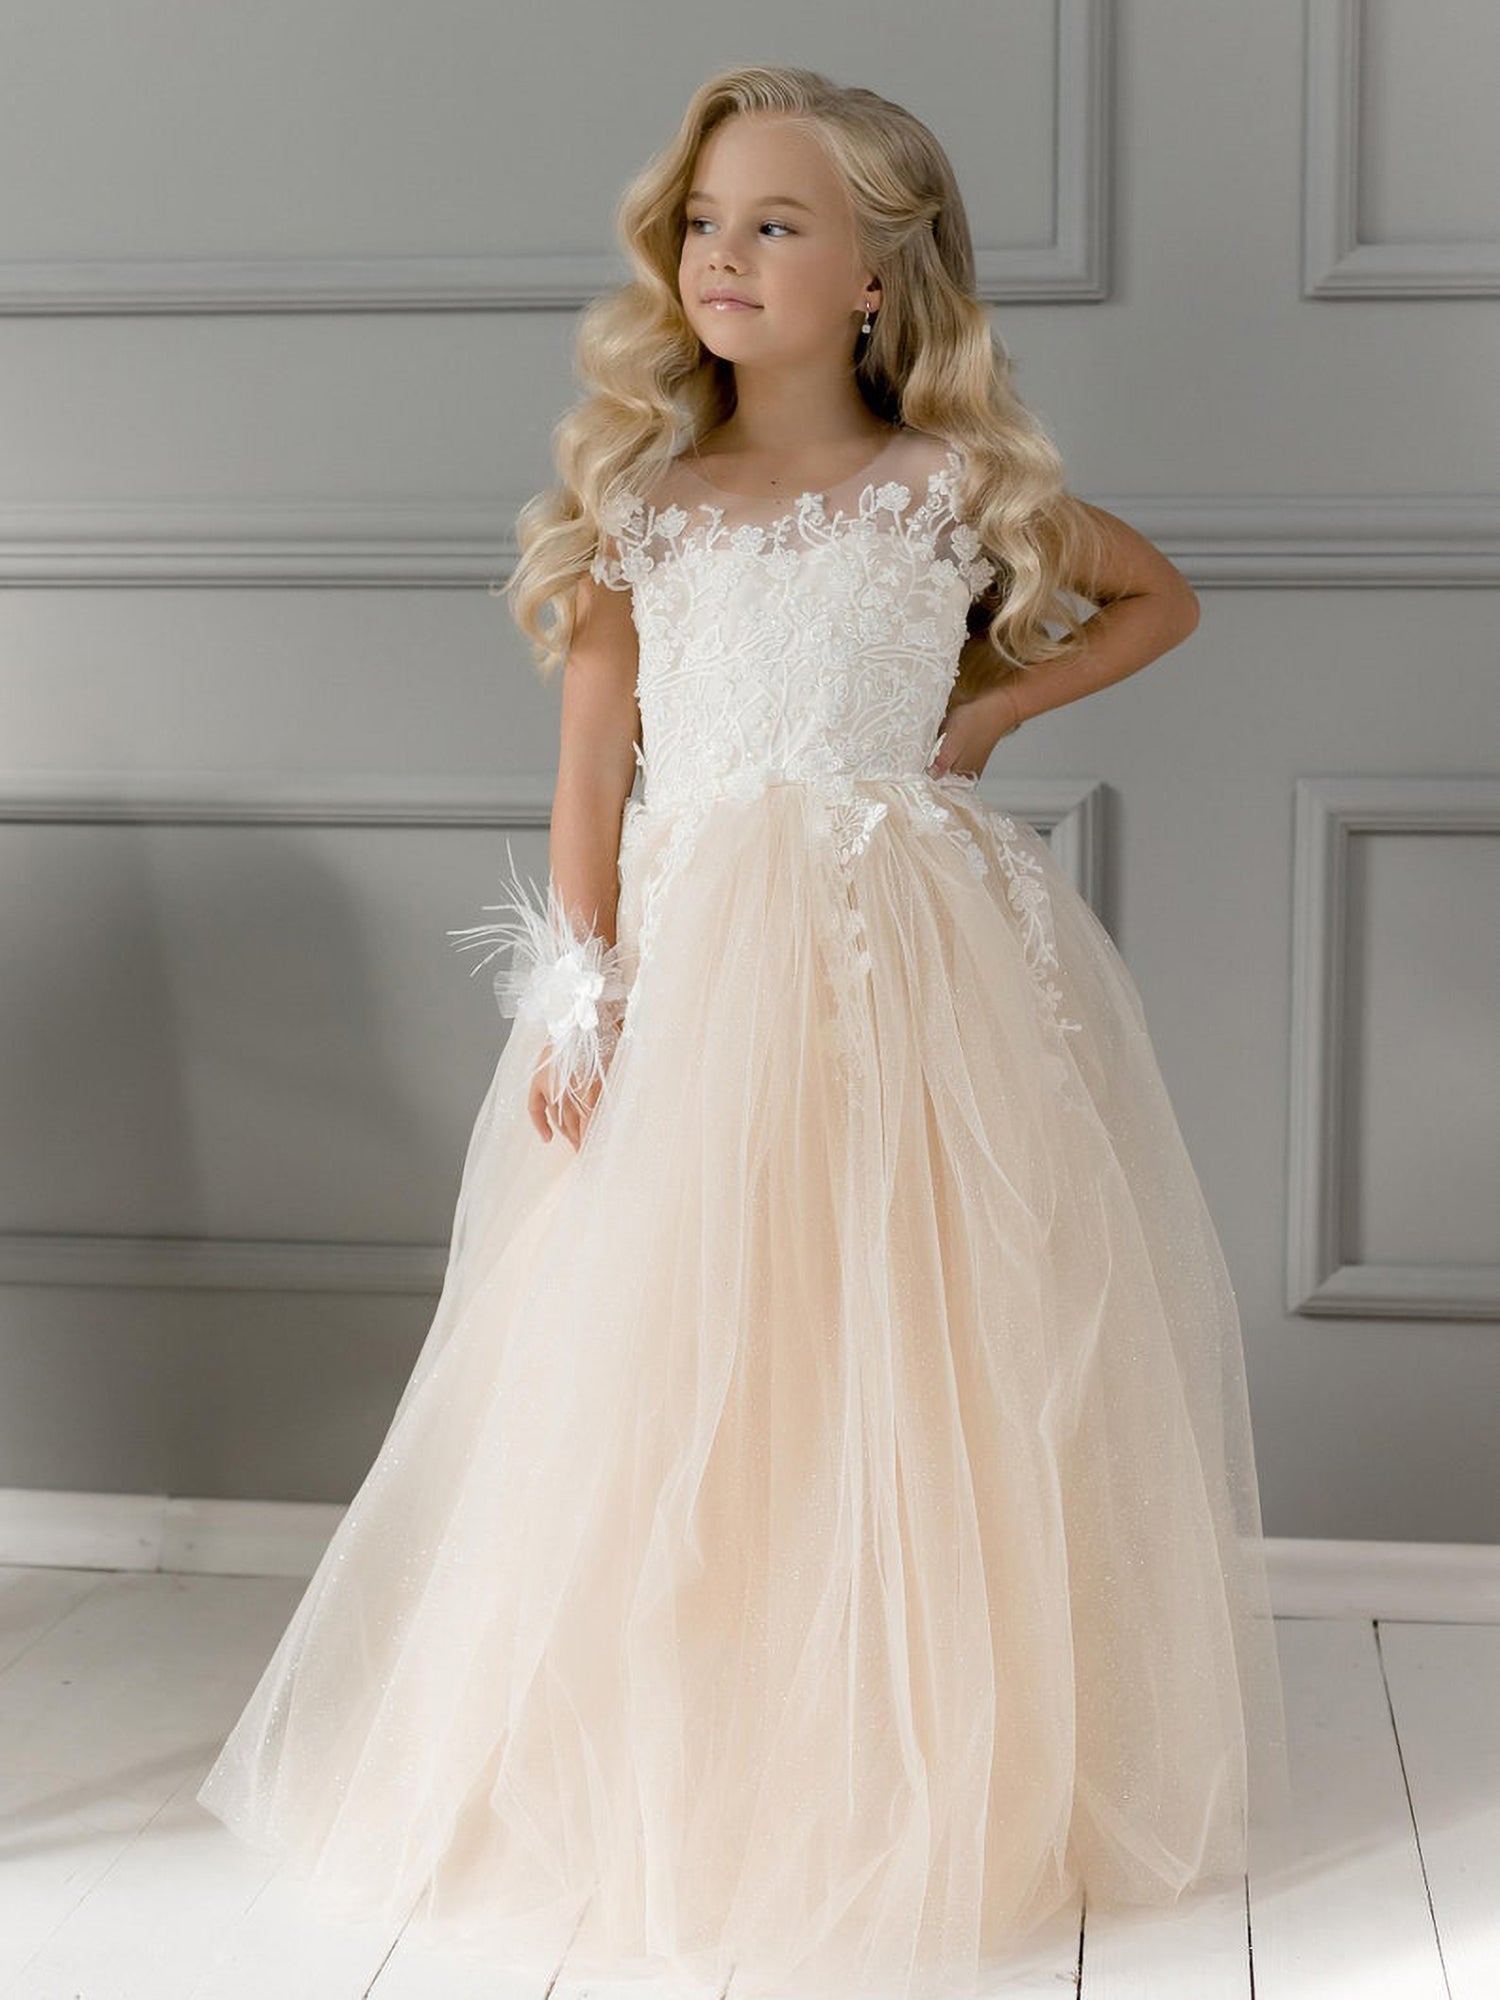 Bellasprom Simple Sleeveless A-line Flower Girl Dresses Tulle with Appliques Lace Pearls Bellasprom